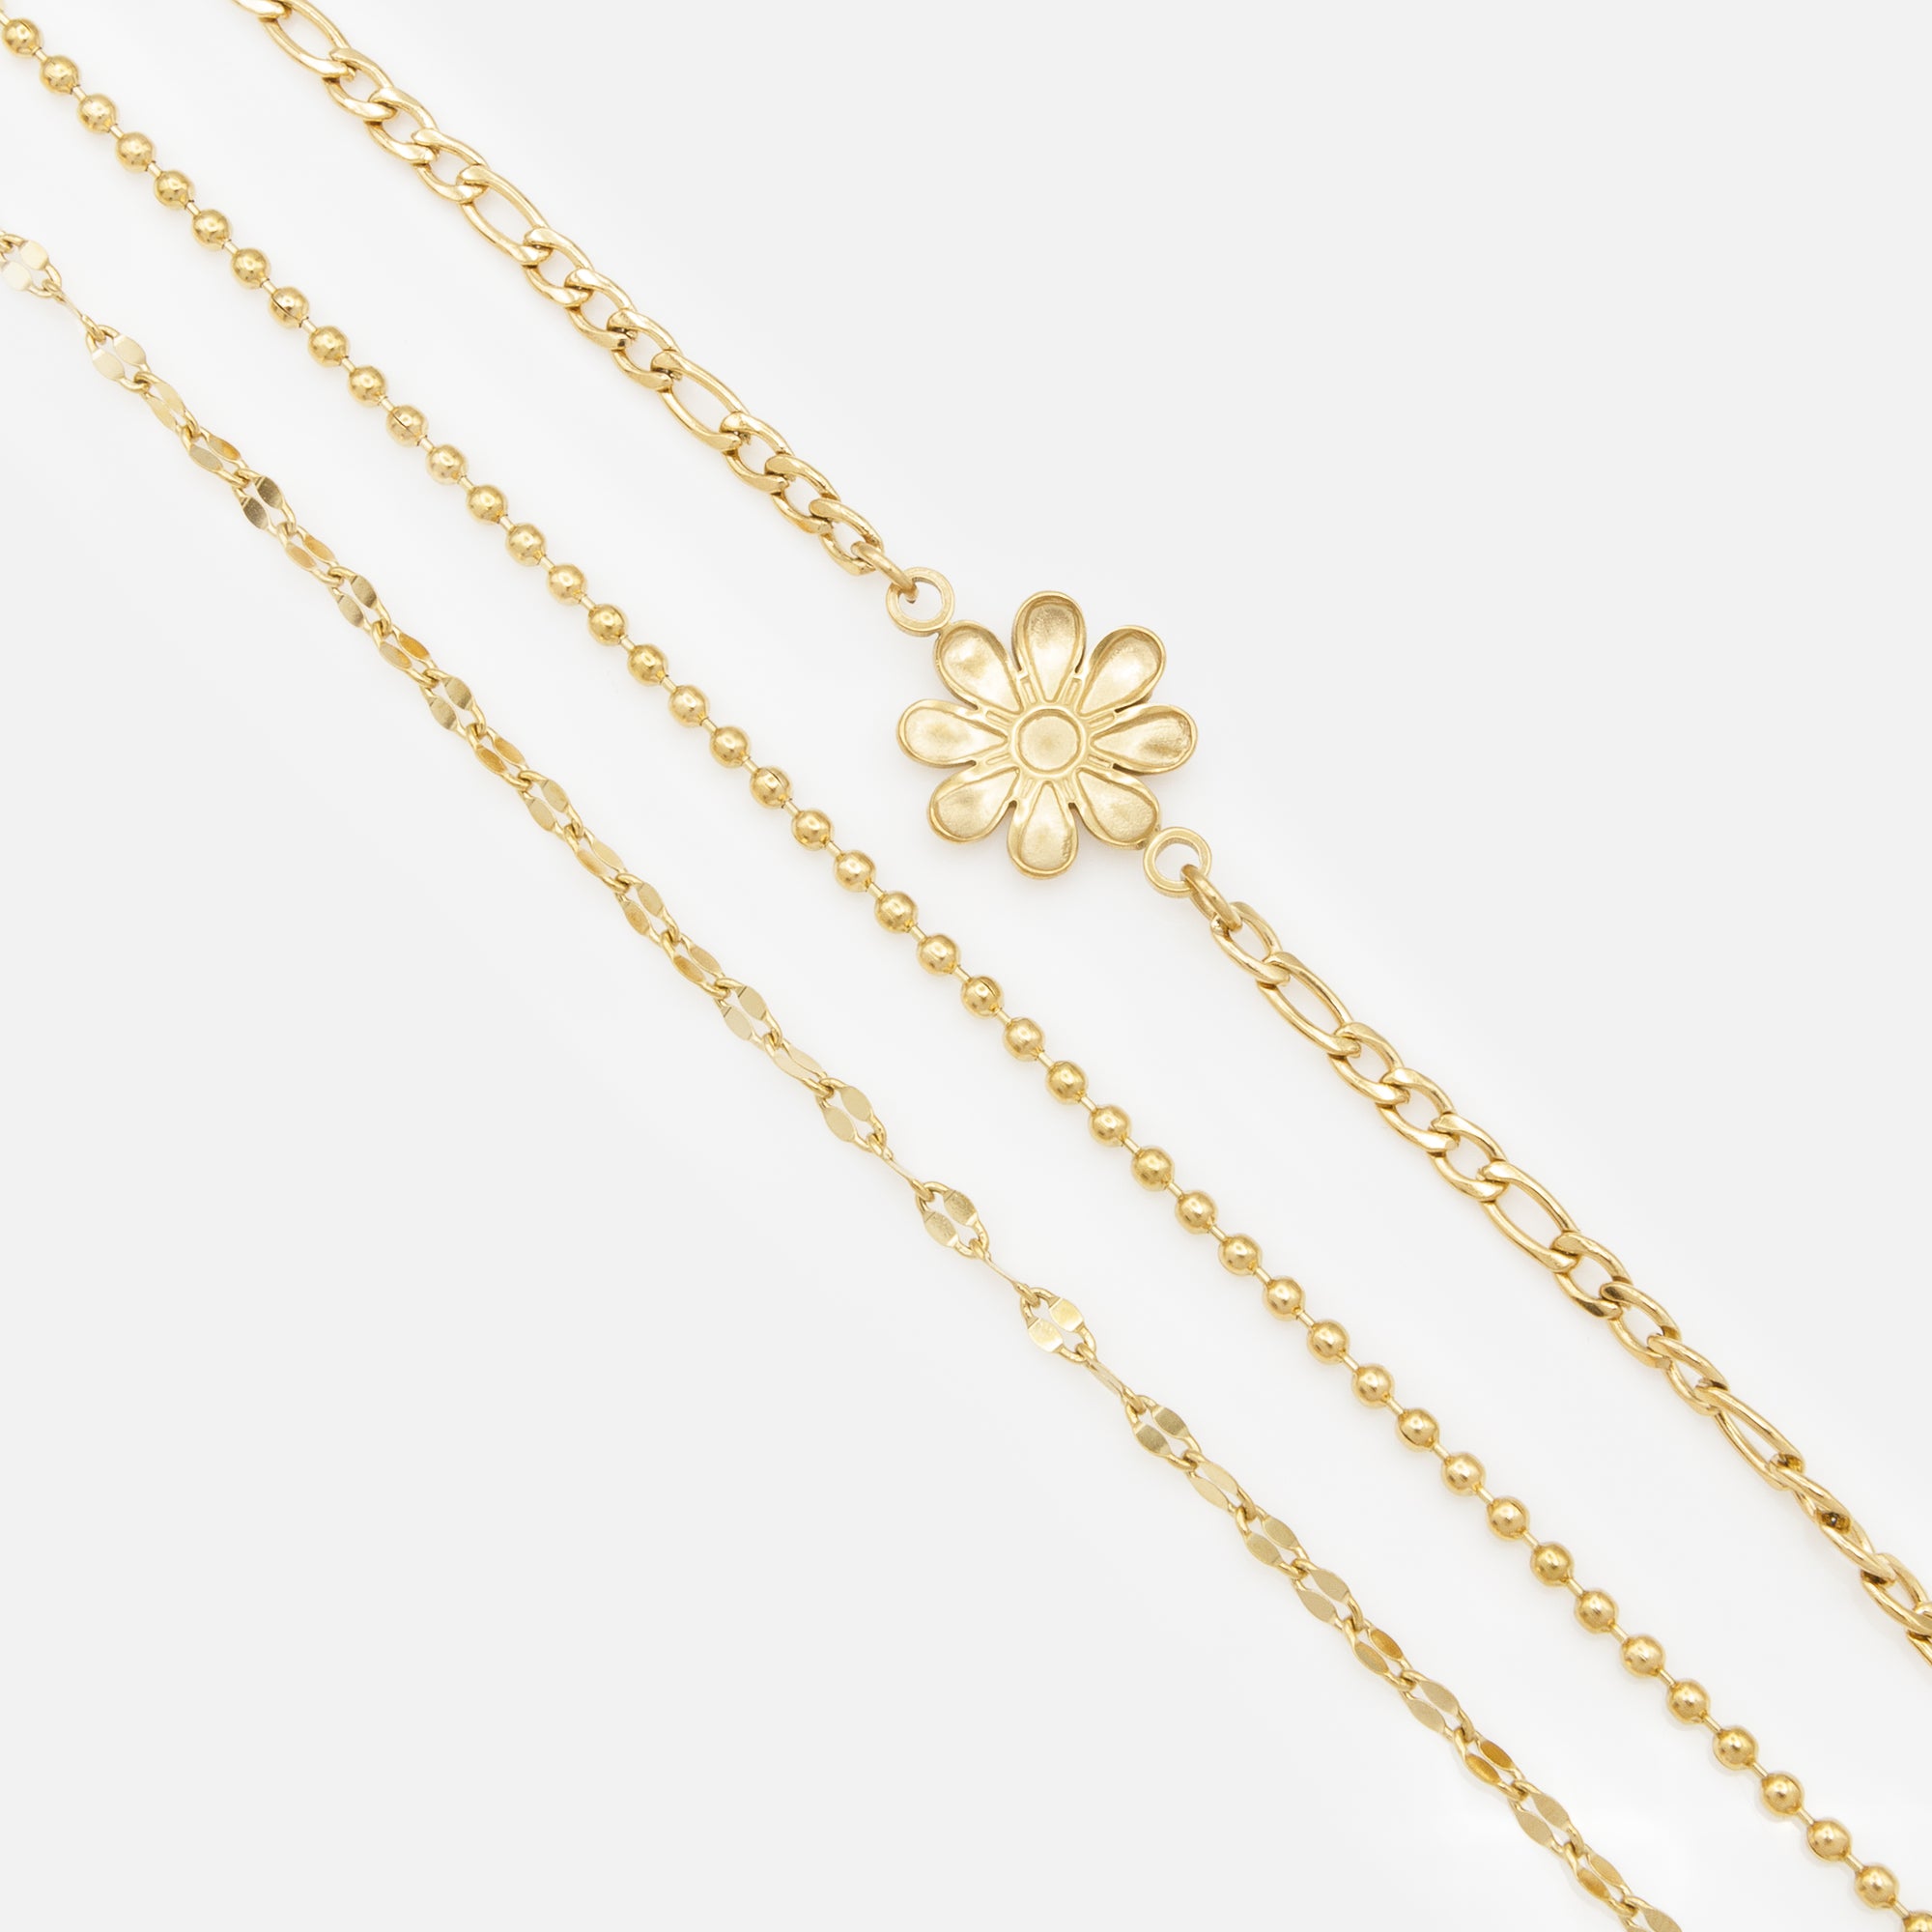 Set of three gold bracelets with pretty stainless steel flower